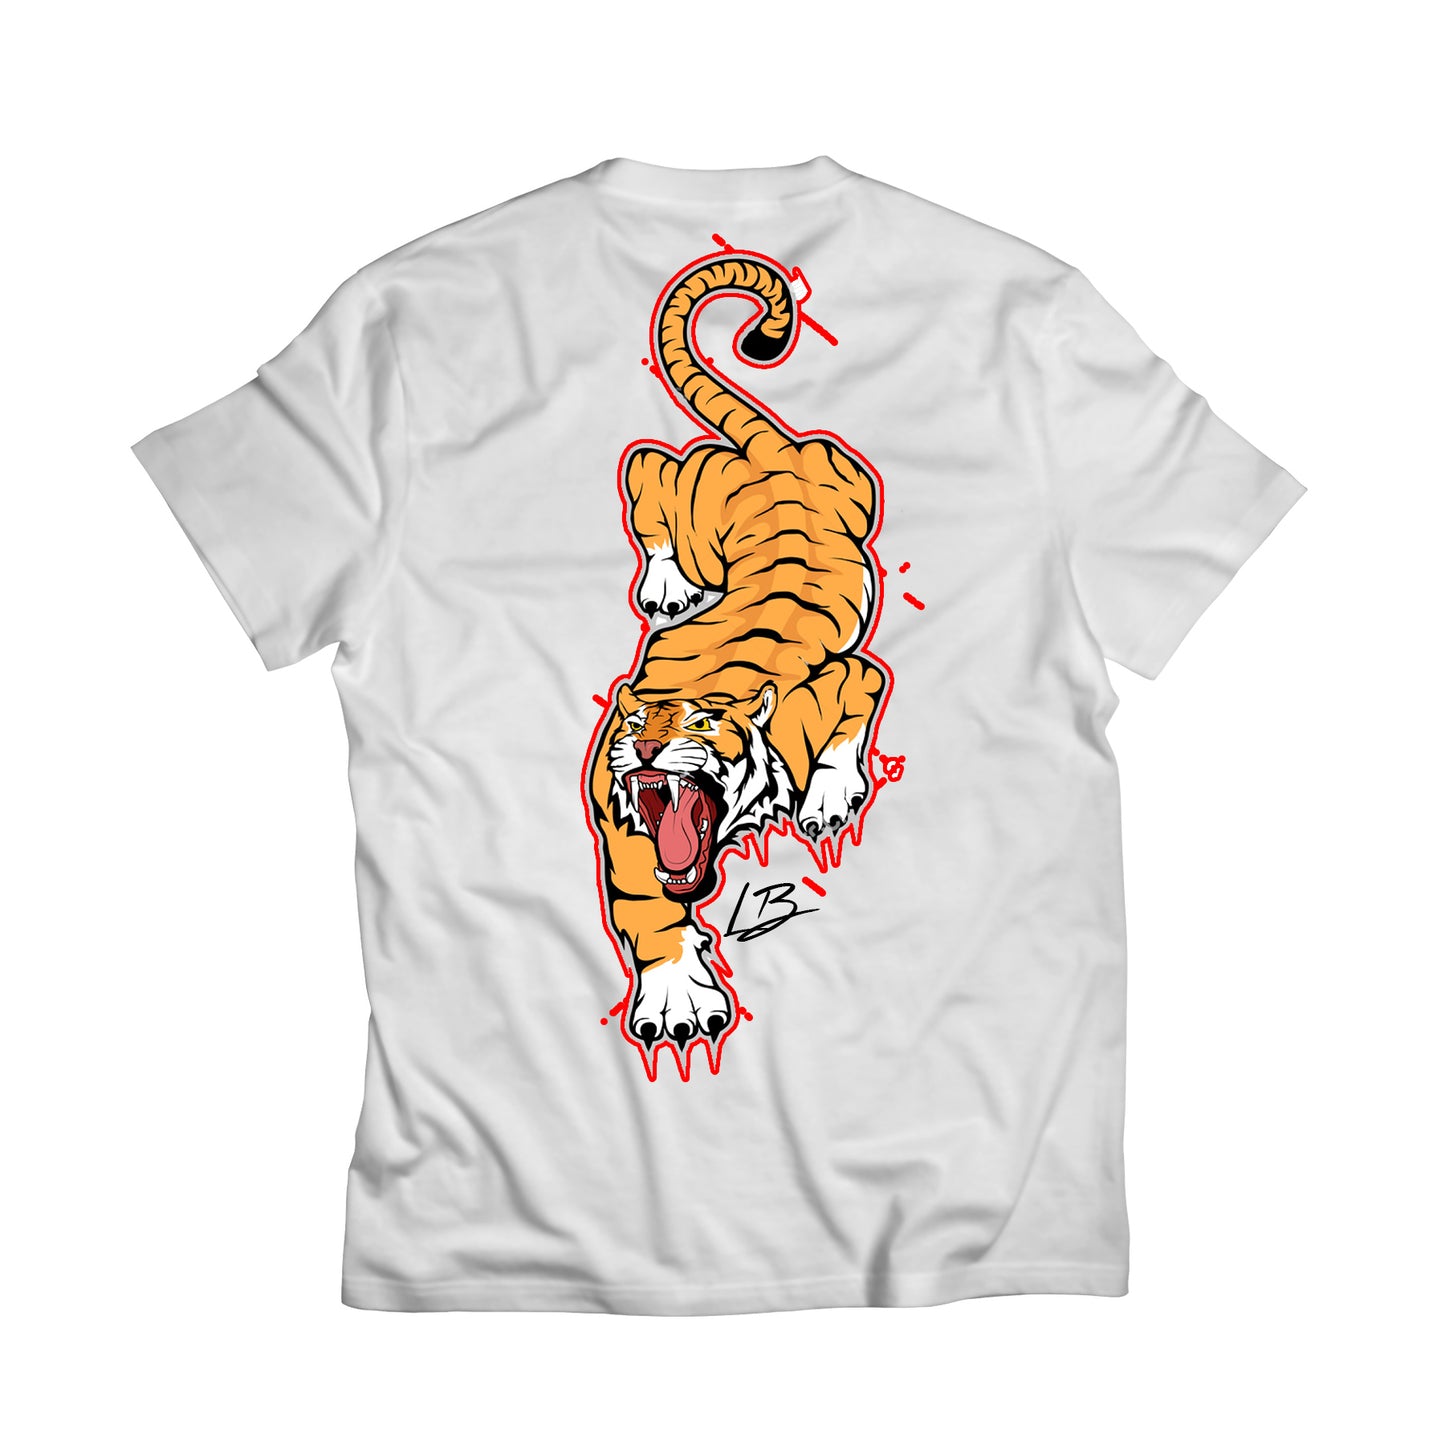 Tiger tee in White